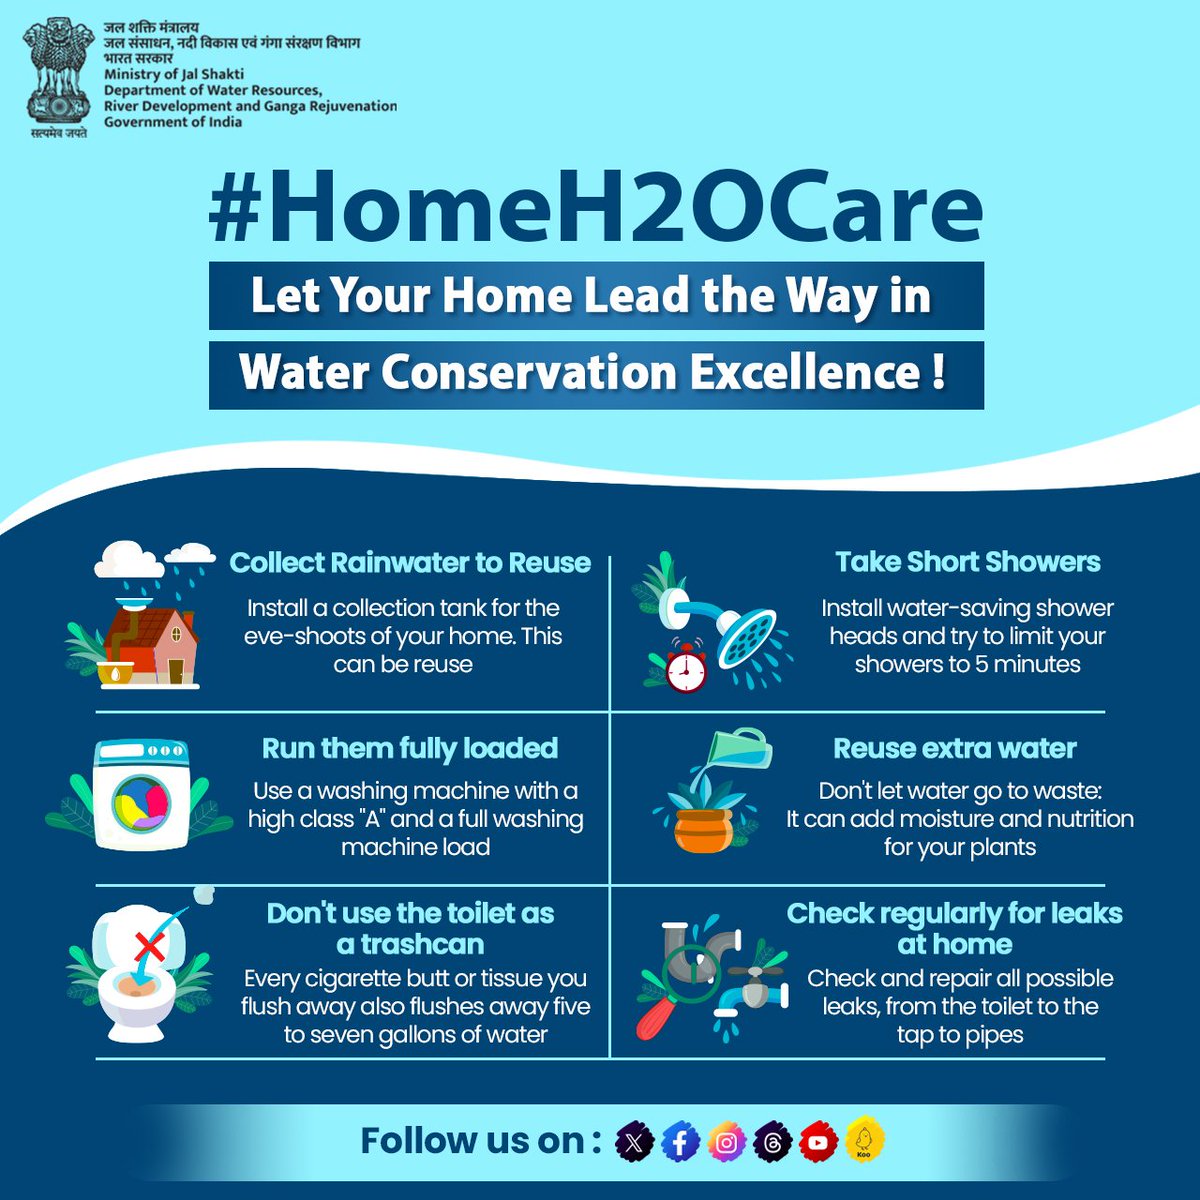 Water Conservation is critical now more than ever. It's a global responsibility that calls for collective action. Join us in our effort to showcase practical ways to #conservewater. Share your ideas using #HomeH2OCare and tag us. Let's make a difference together! #SaveWater